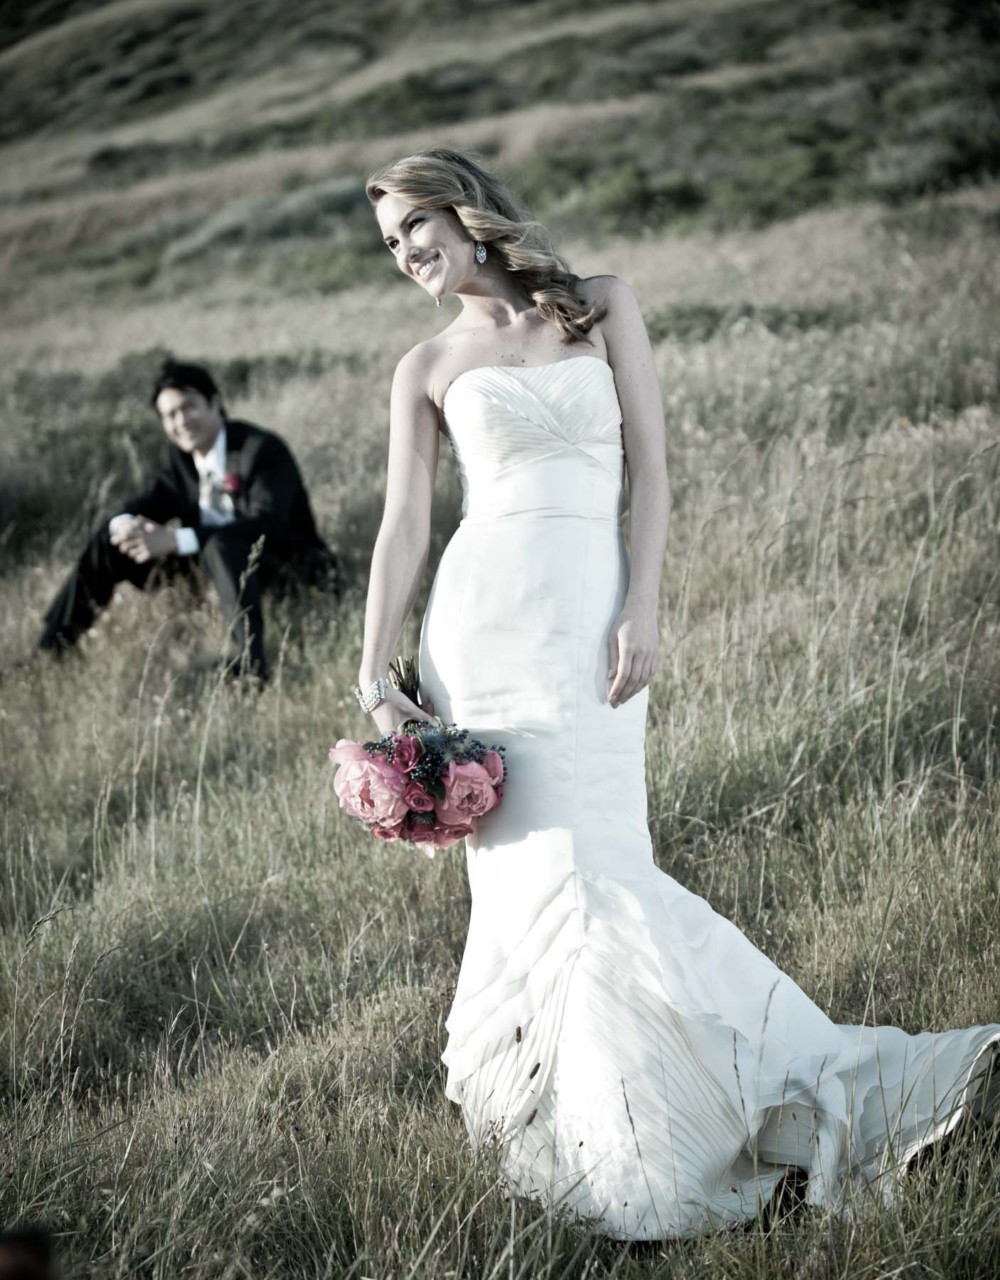 Looking for a top-rated wedding photographer in Big Lake?